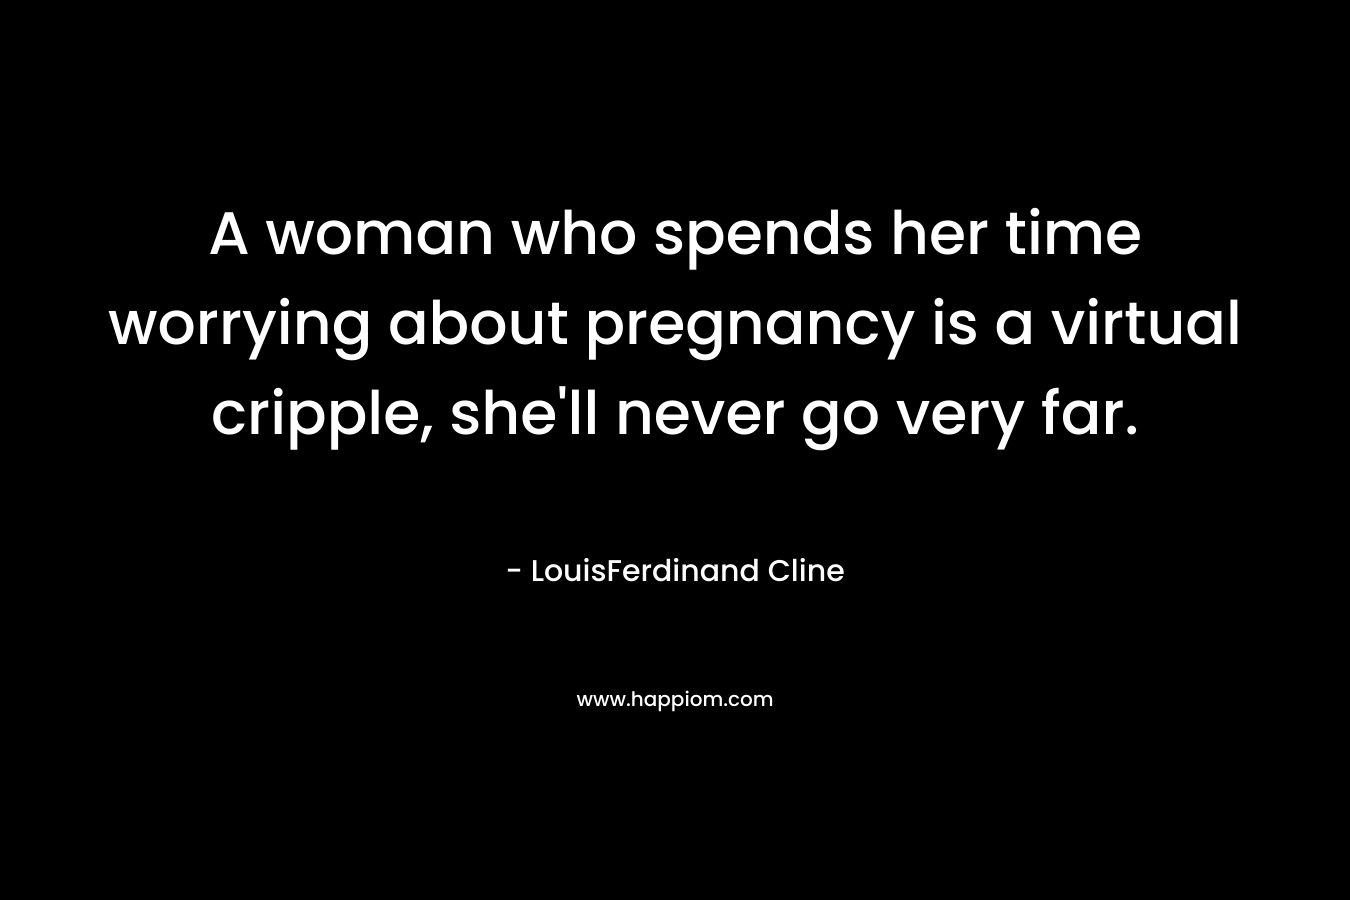 A woman who spends her time worrying about pregnancy is a virtual cripple, she'll never go very far.